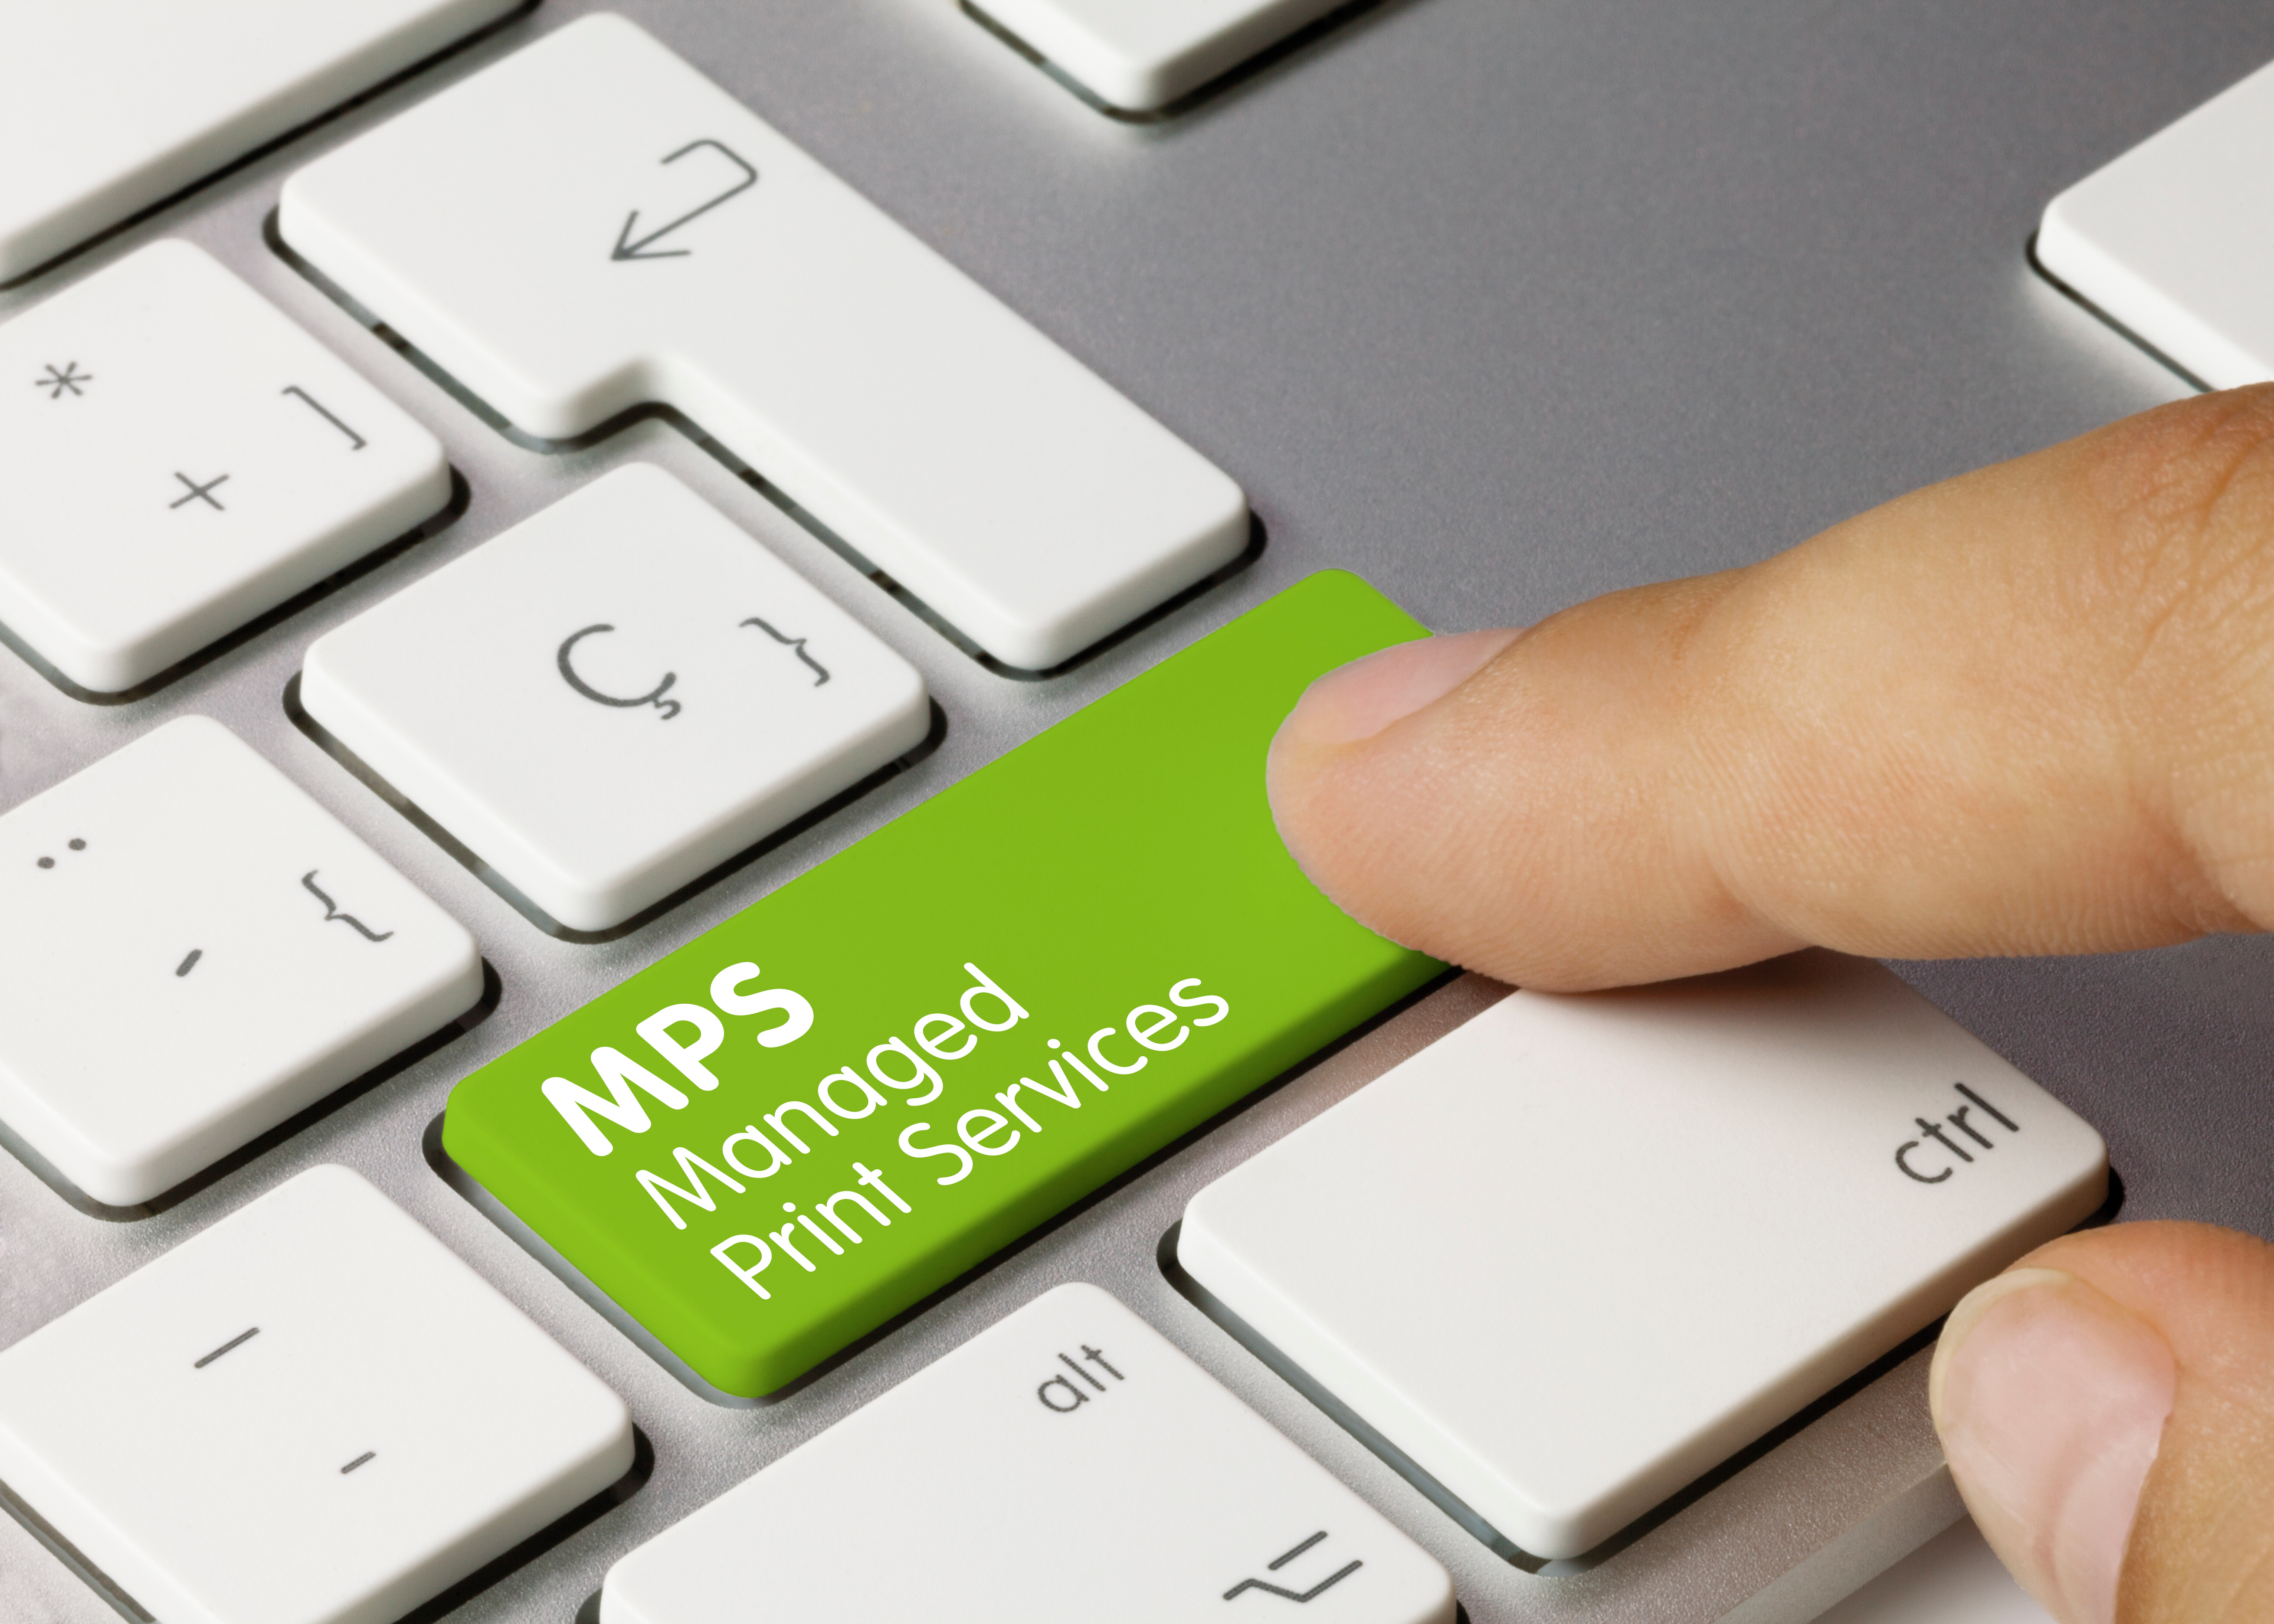 An image of a keyword with MPS managed print services written on the enter key.